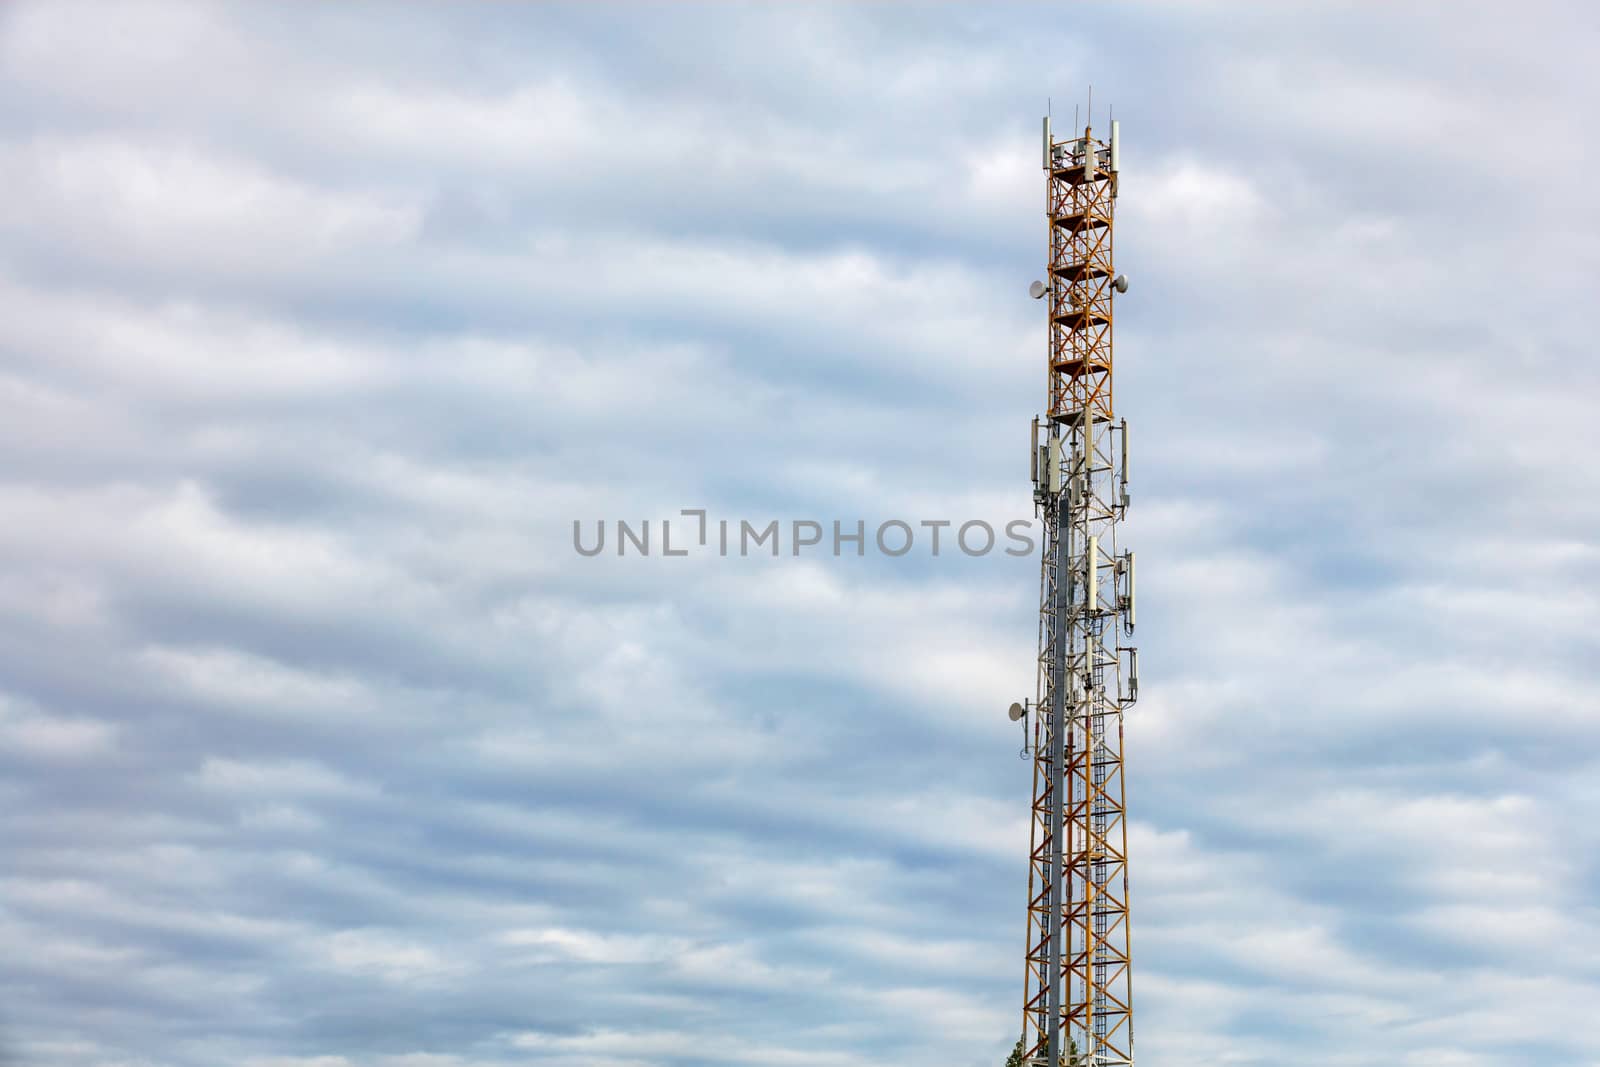 High telecommunication tower of 3G, 4G and 5G cellular communication with antennas against blue cloudy sky, copy space.